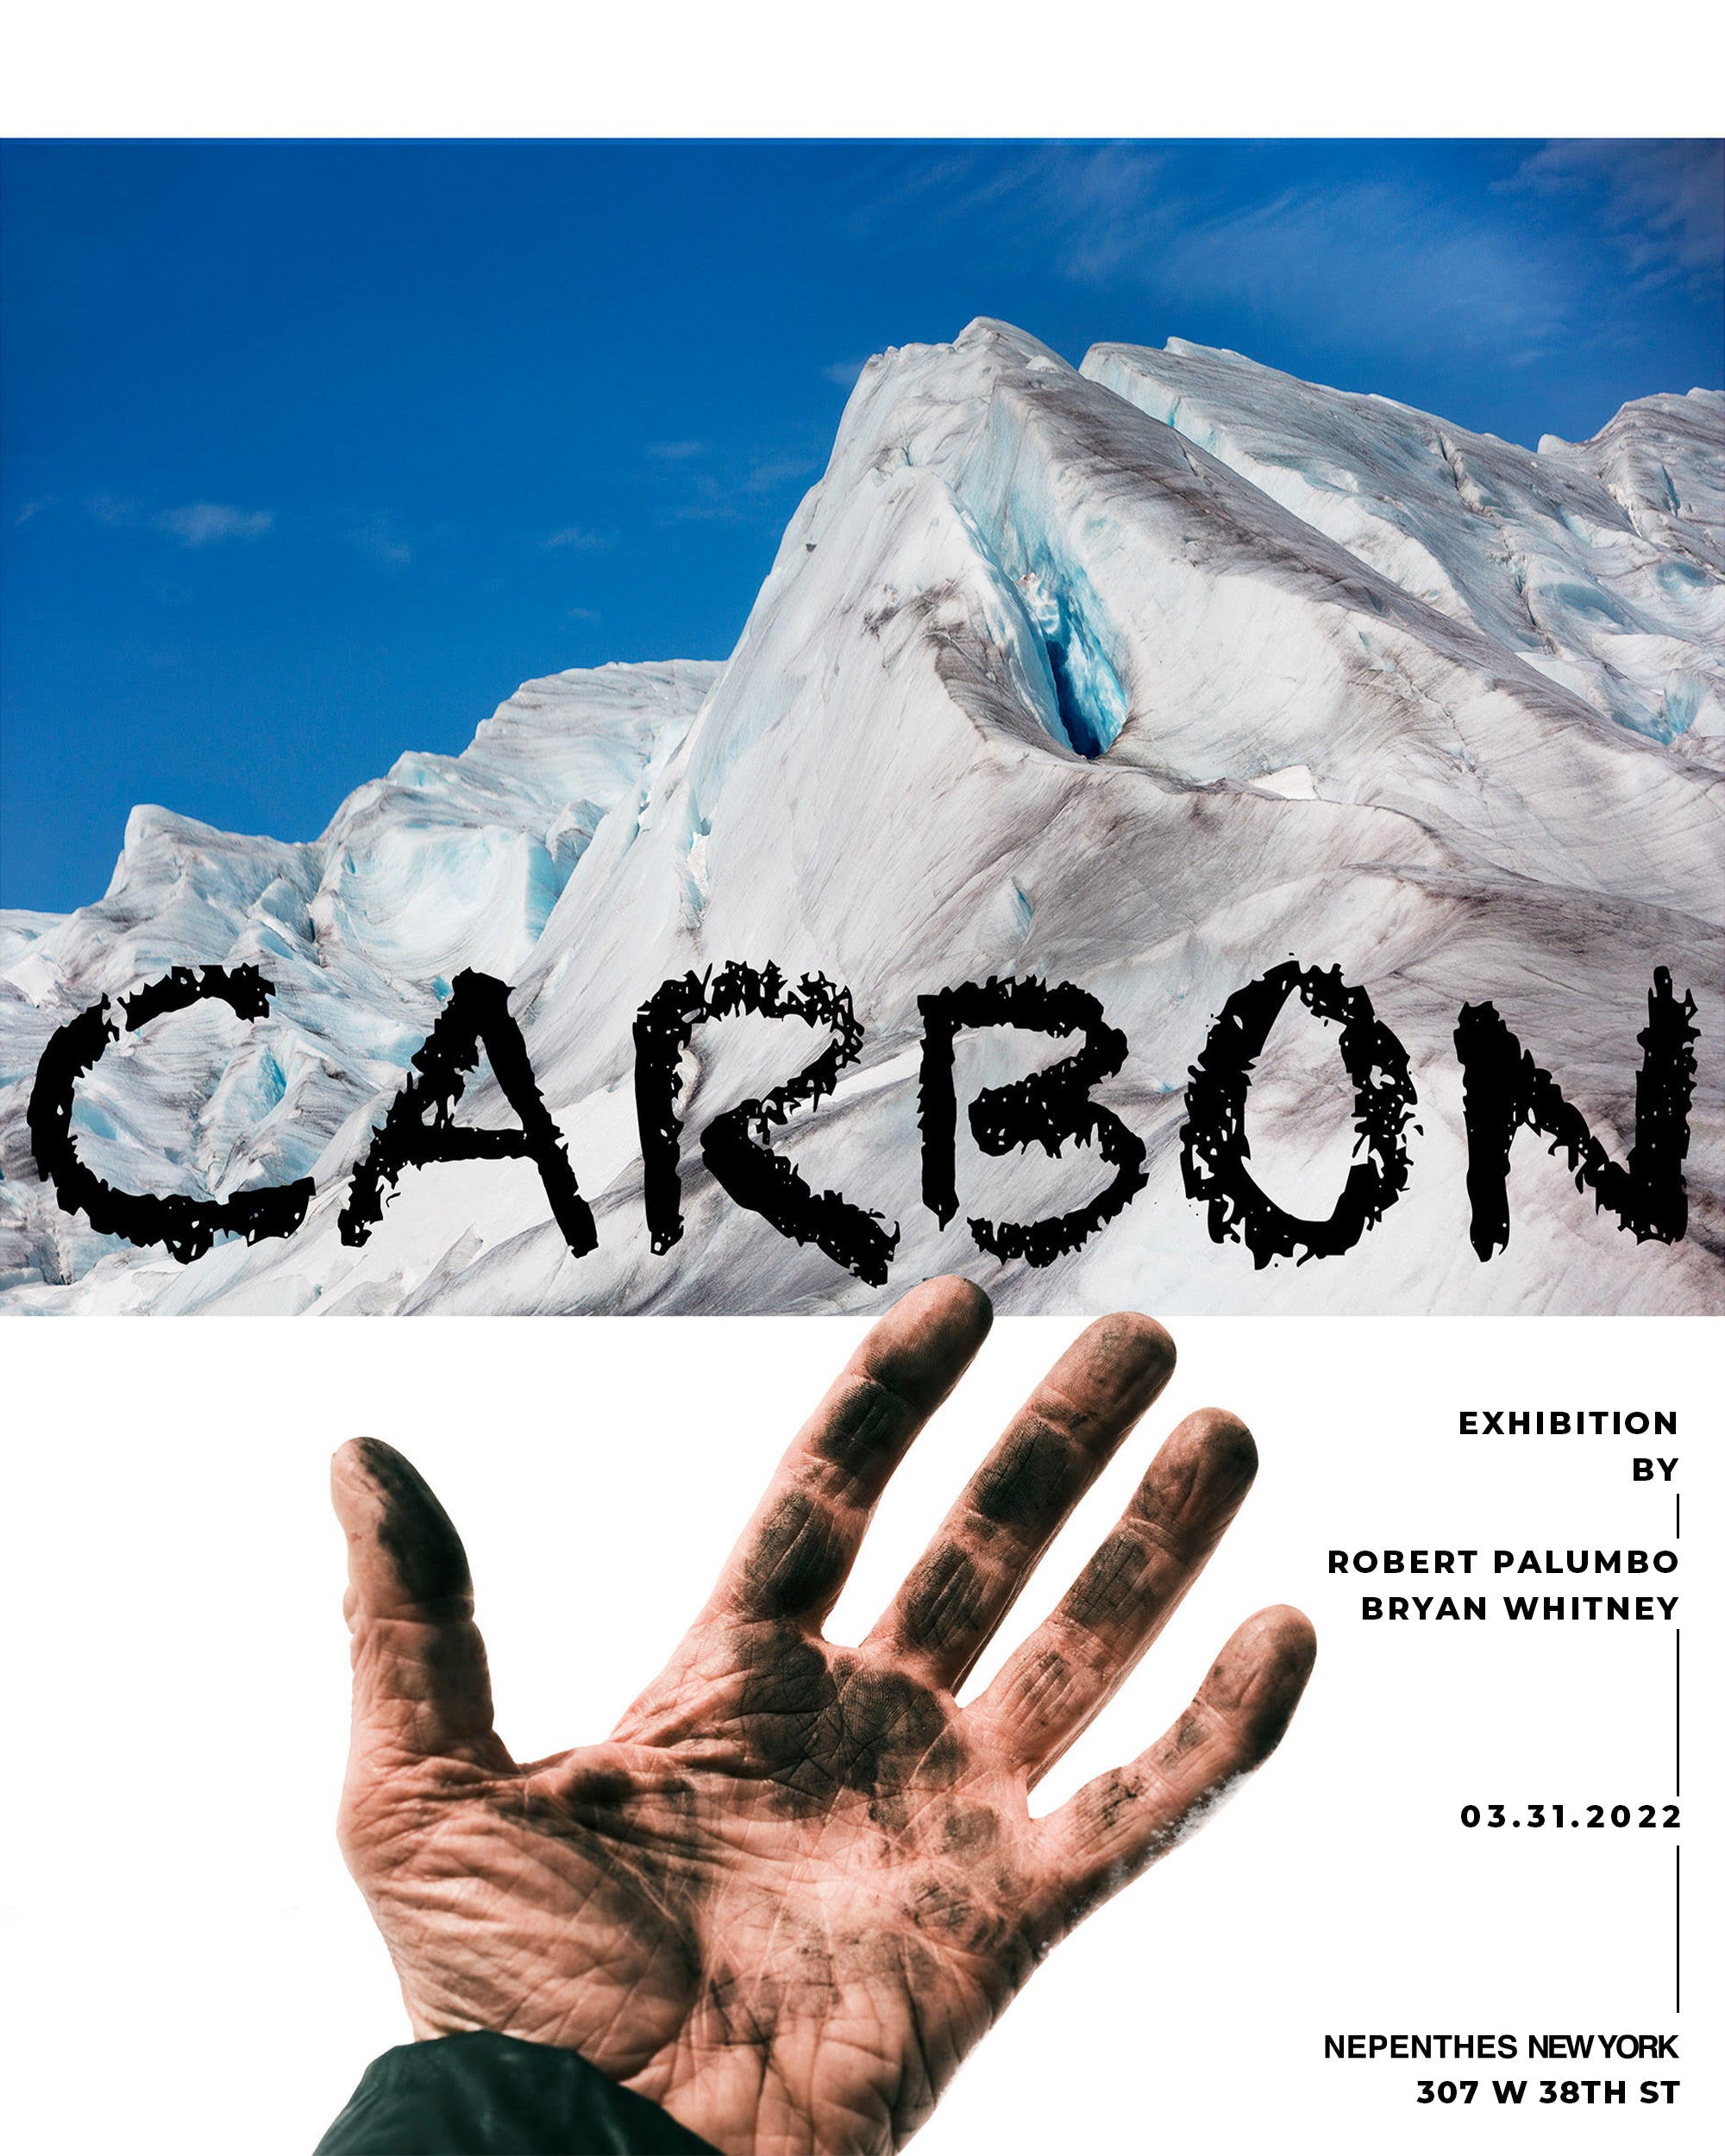 Nepenthes New York Presents : "CARBON" by Robert Palumbo & Bryan Whitney - 03.31.22